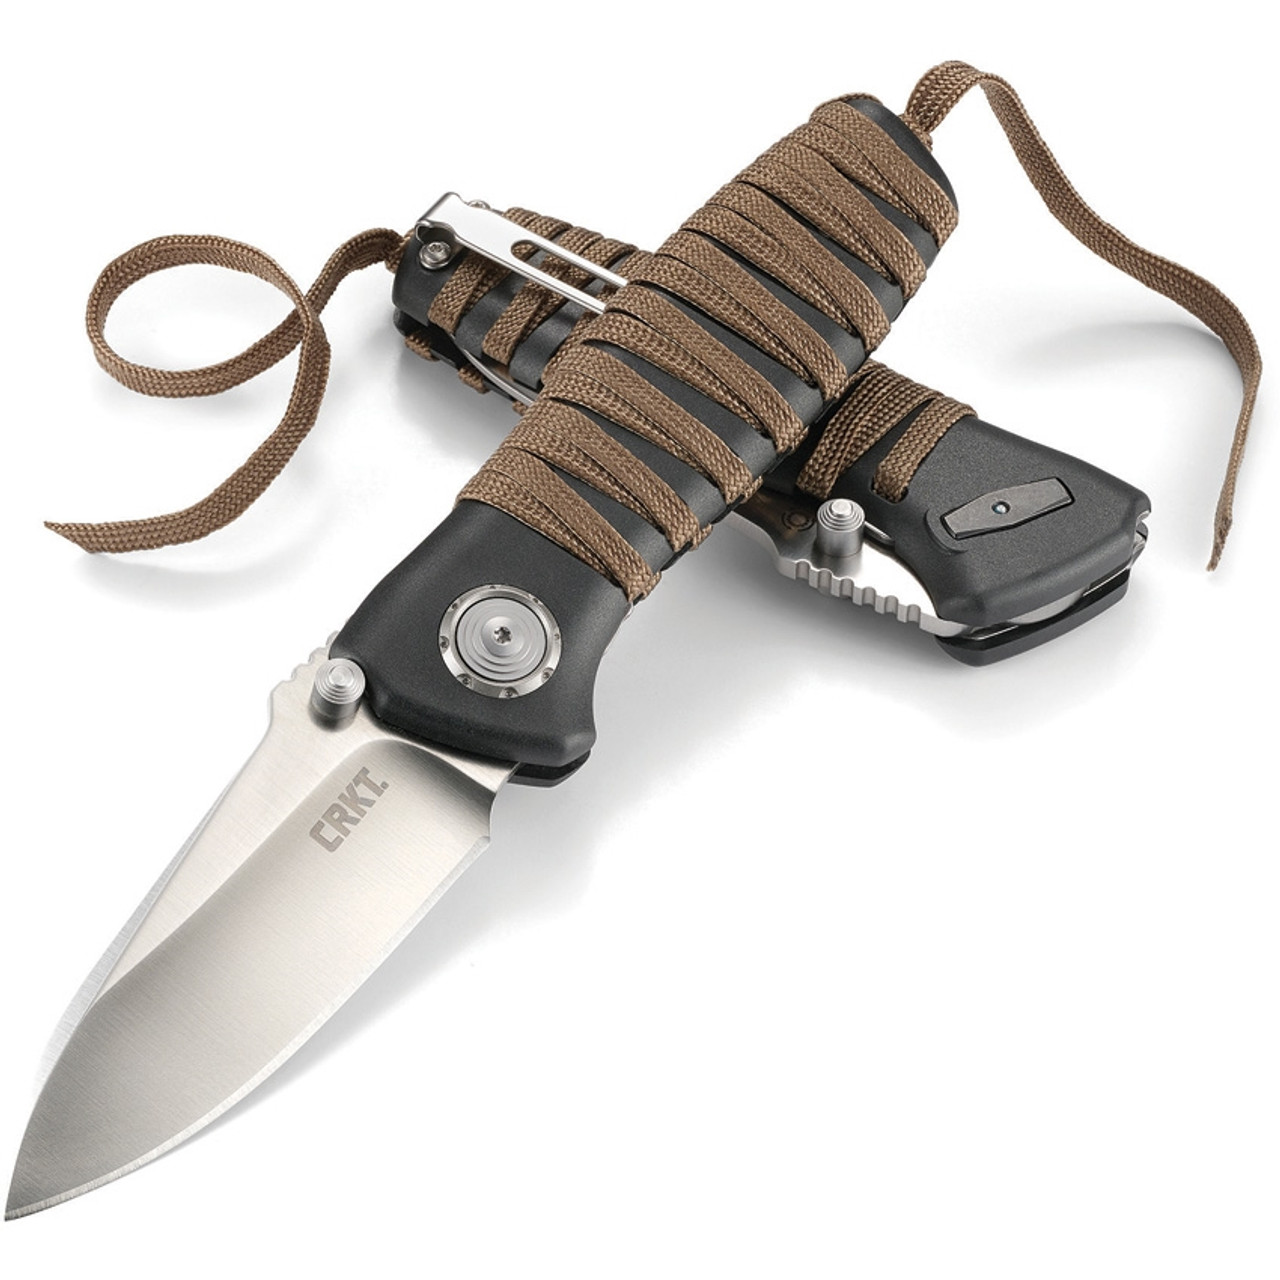 CRKT Parascale Deadbolt (CR6235) 3.25" D2 Satin Drop Point Plain Blade, Black Glass Reinforced Nylon Handle with Tan Cord Wrapped Inlay